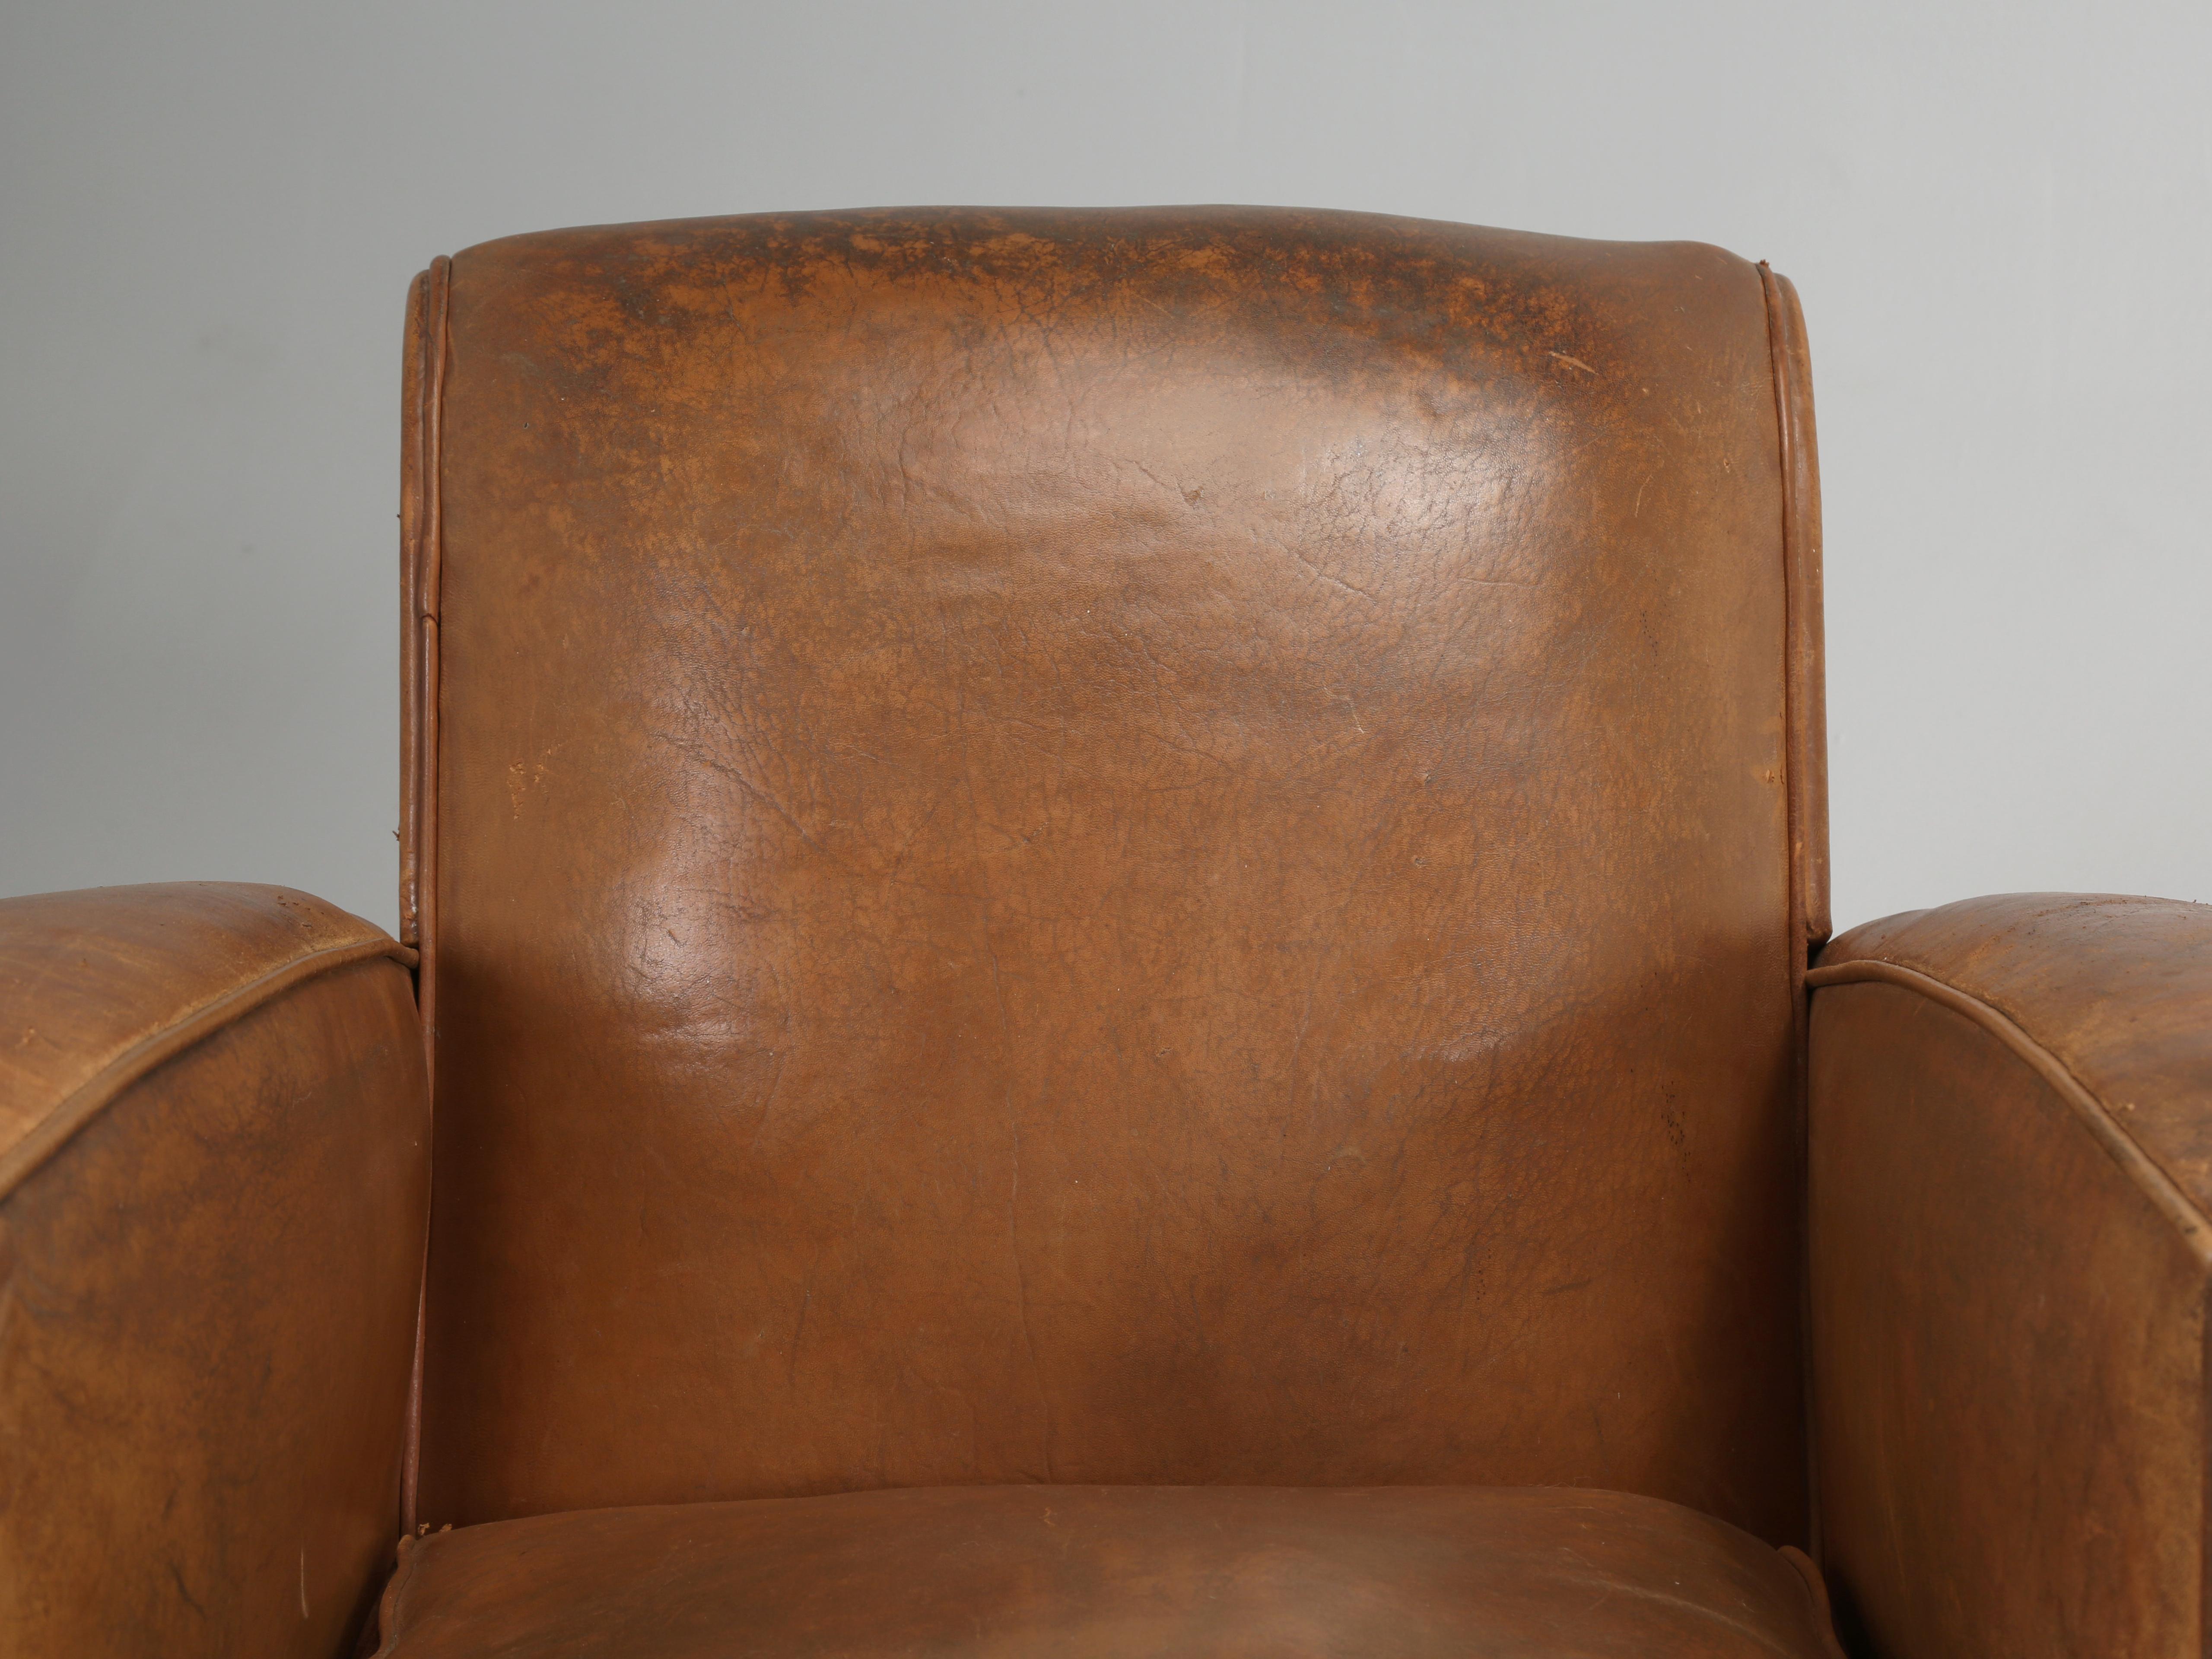 Pair of French Leather Club Chairs that have been completely disassembled down to the bare wood frames and everything inside has been properly restored to as new condition. All of the leather on the exterior is old and there are zero new leather